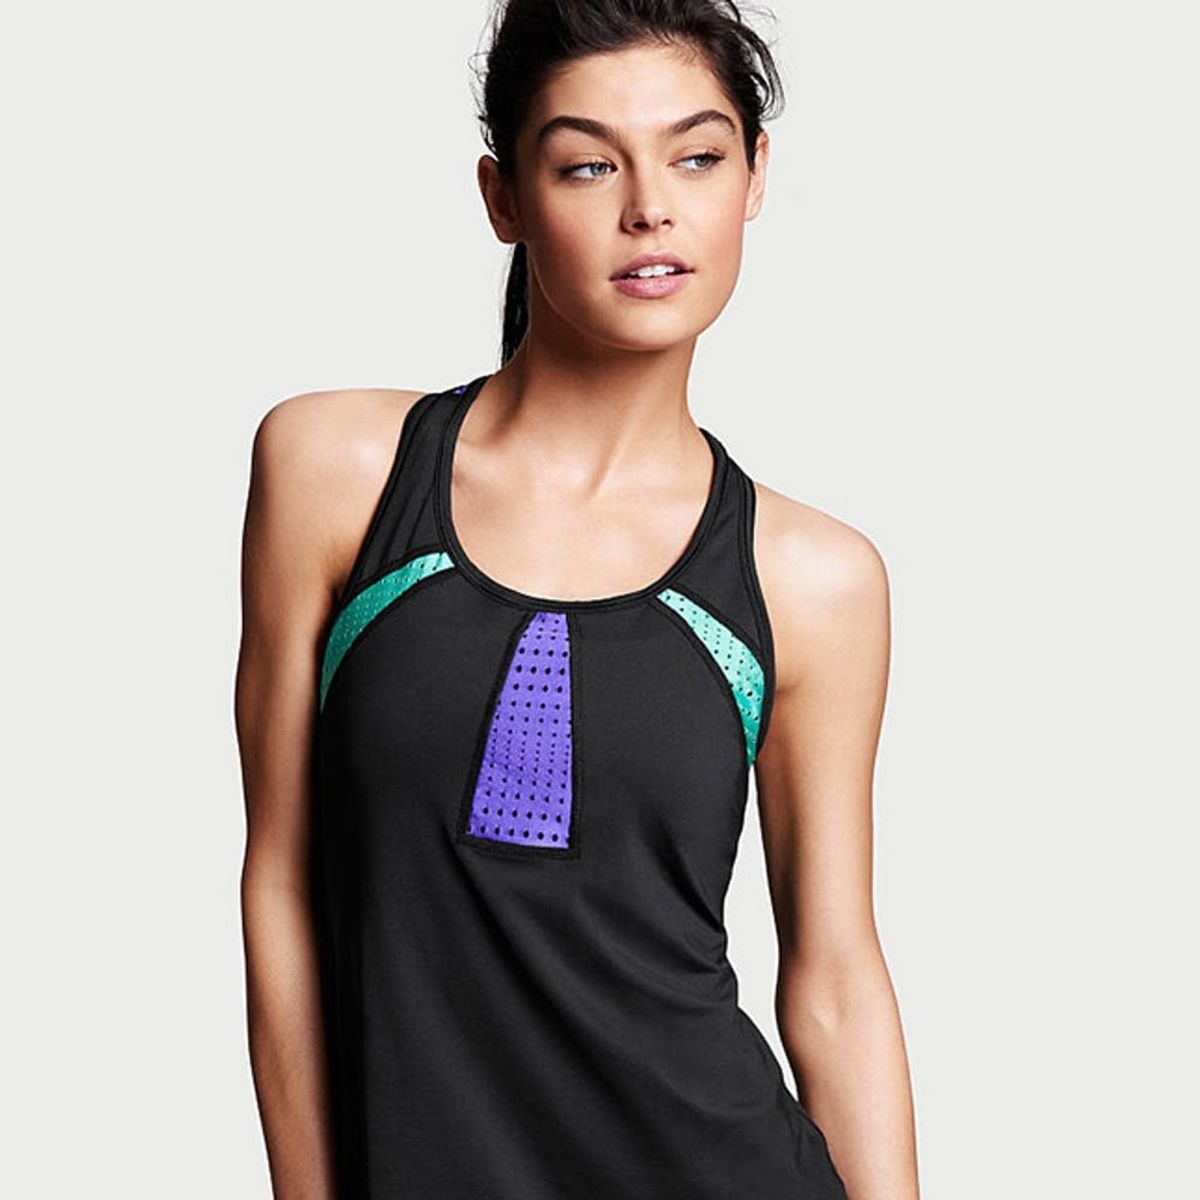 9 Athletic Tops That Will Show Off Your Arms